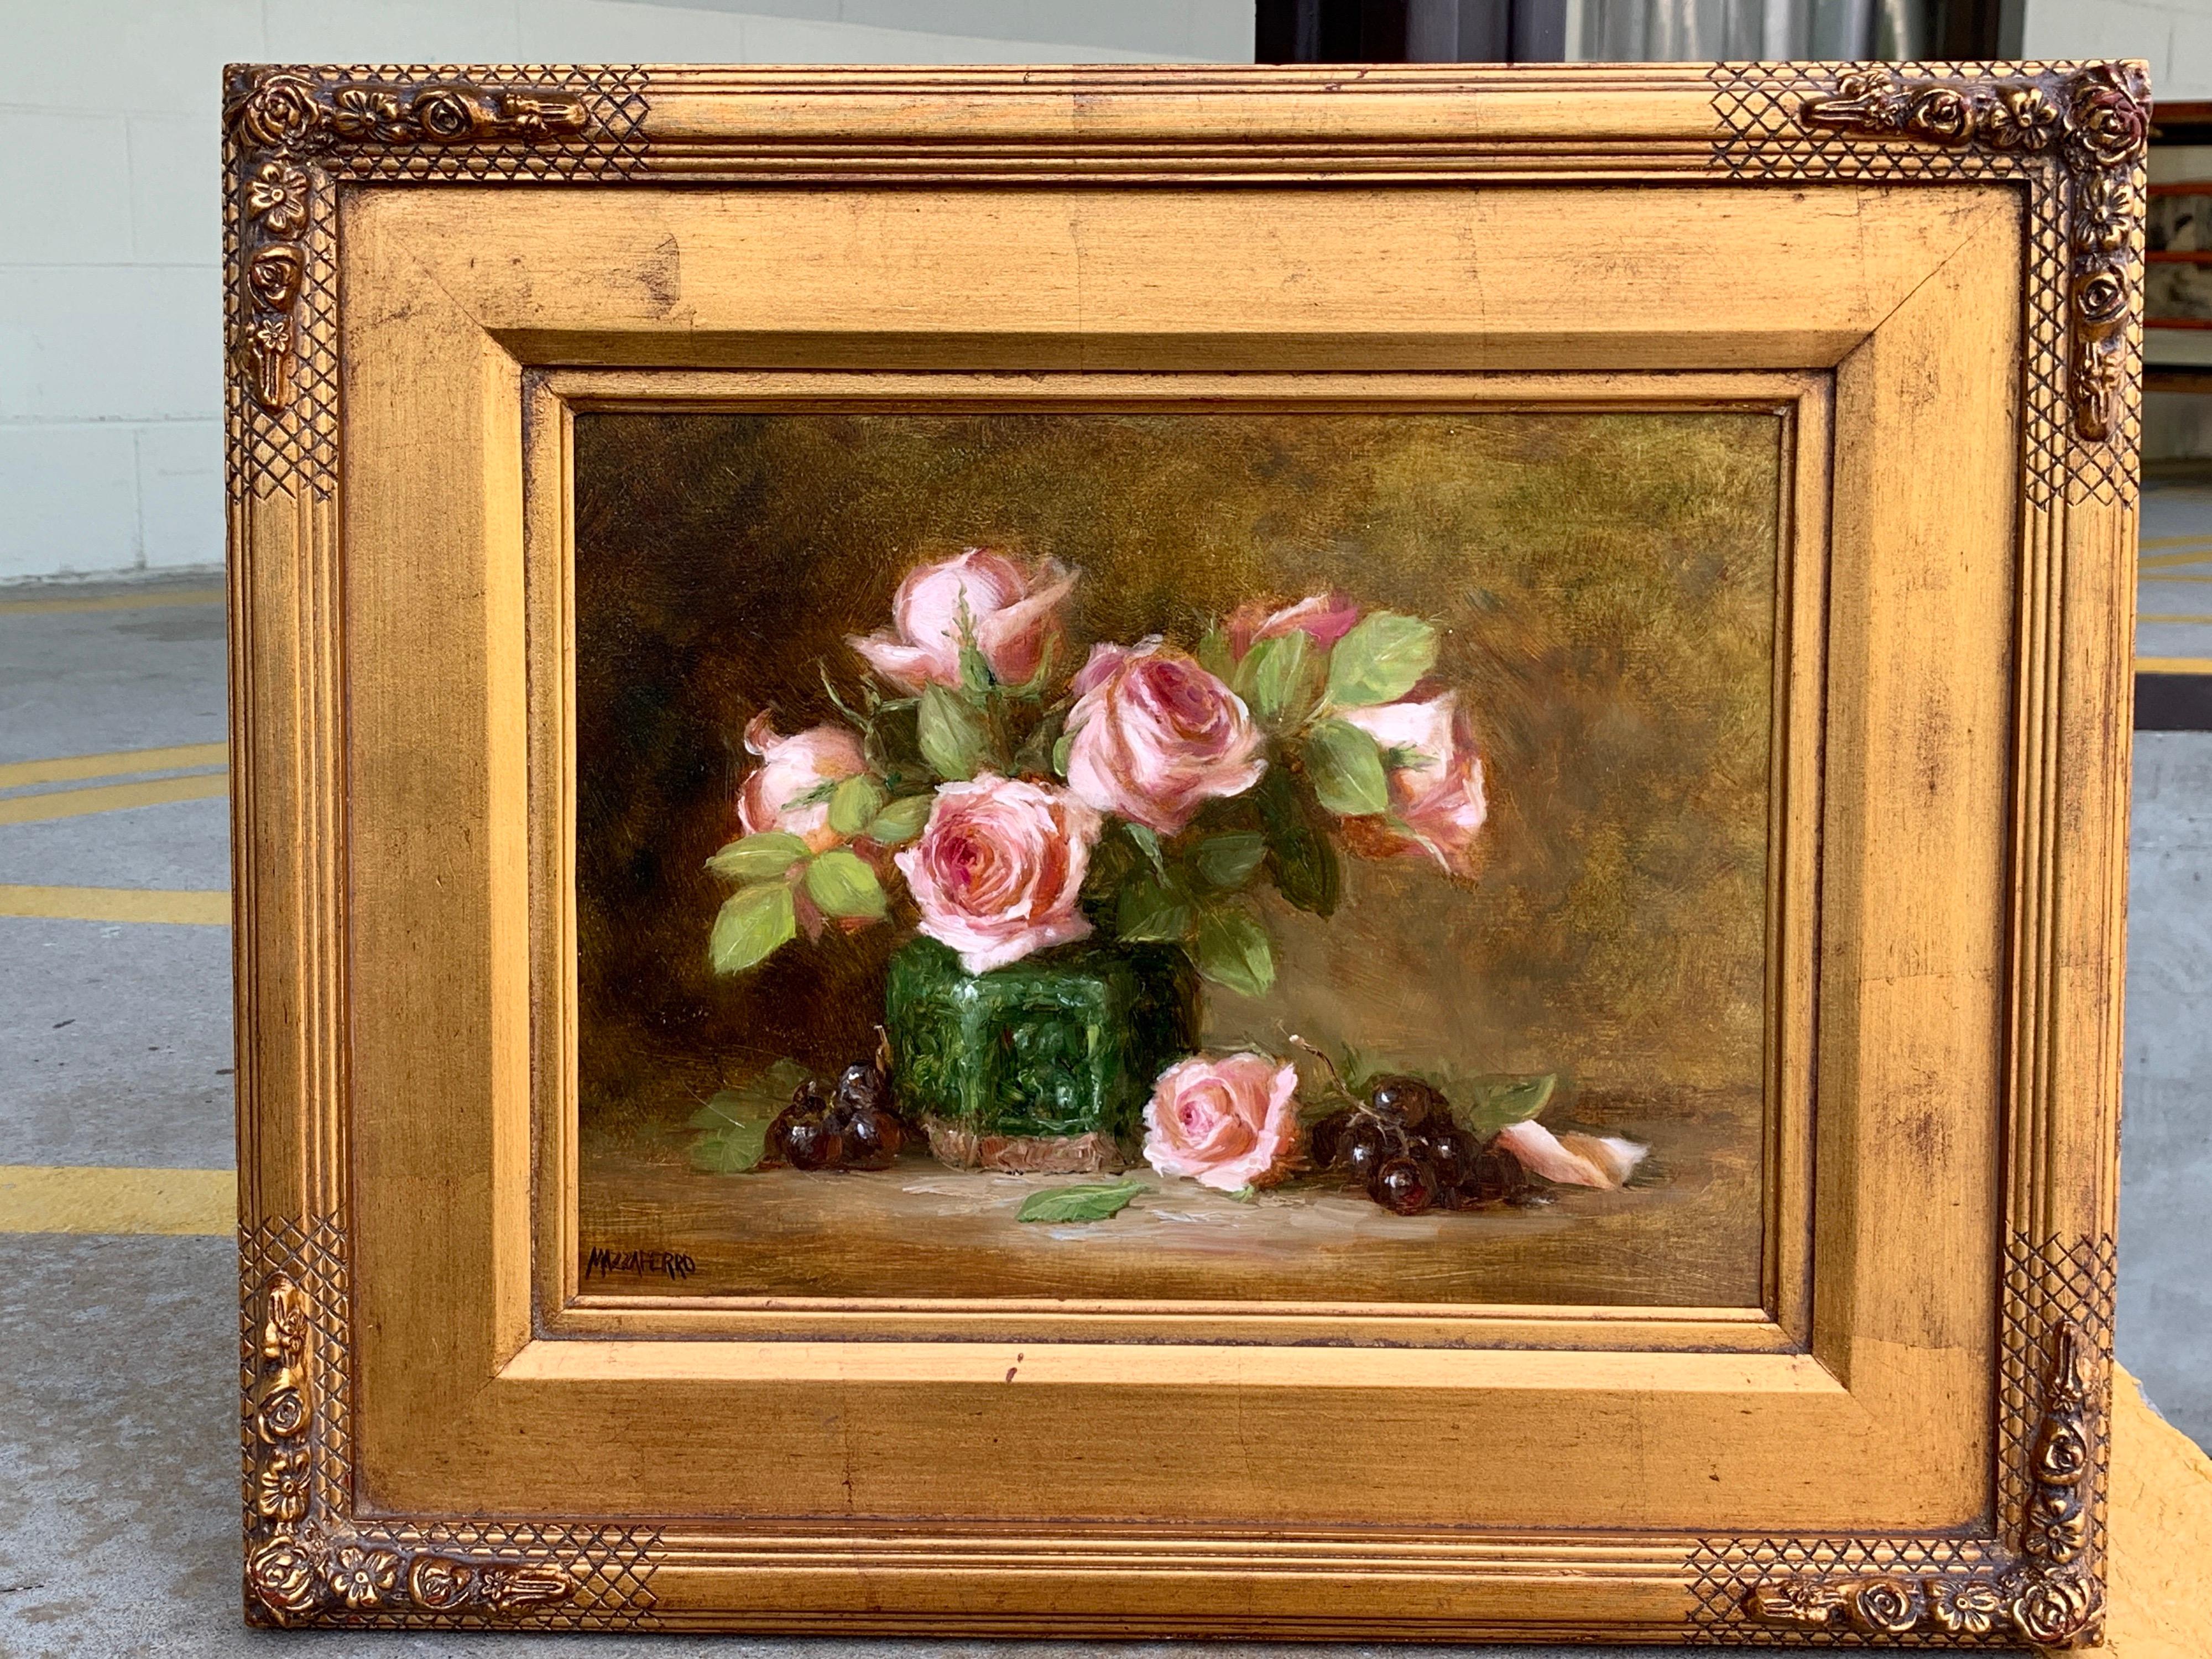 Roses in a Green Chinese Export Jar Still Life by, Lucy Mazzaferro  1